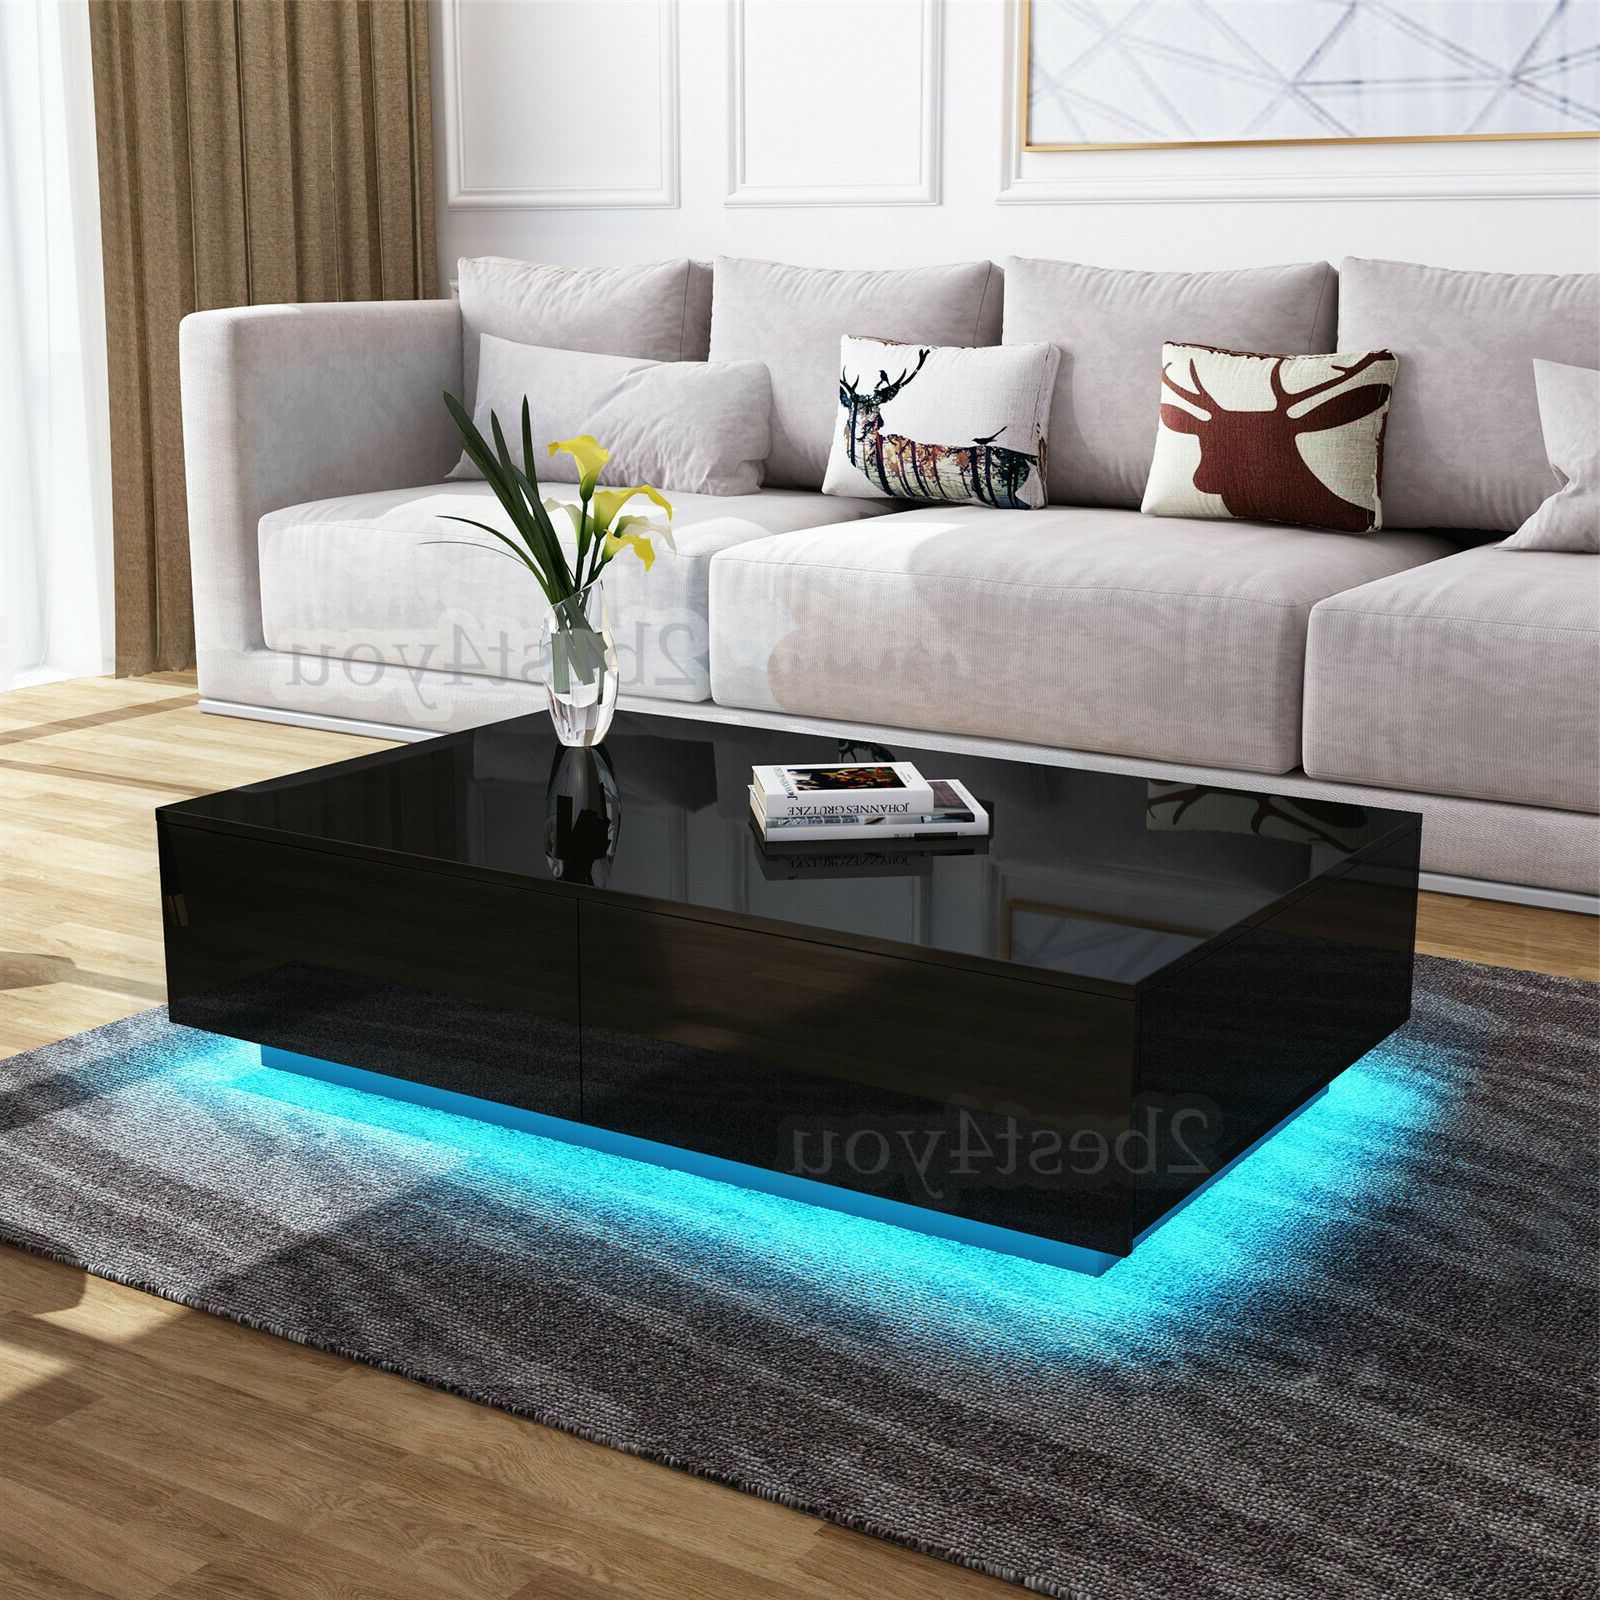 Most Recently Released Modern Coffee Table With Led Lights – Stellabracy In Rectangular Led Coffee Tables (View 9 of 15)